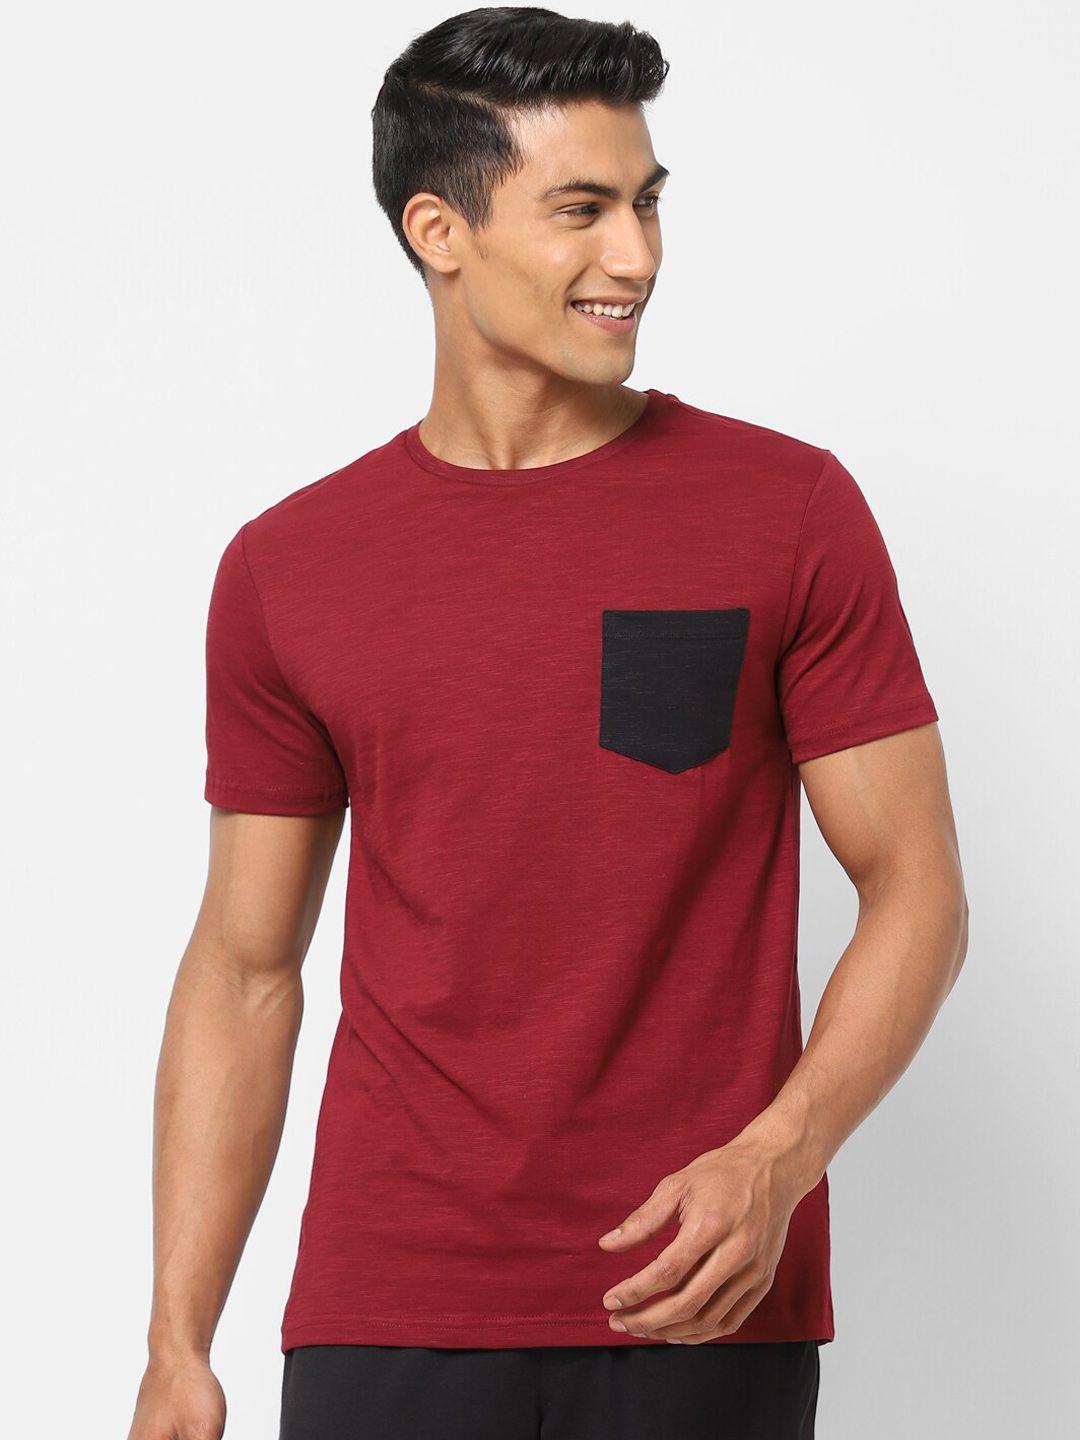 ajile-by-pantaloons-men-red-solid-cotton-lounge-t-shirts